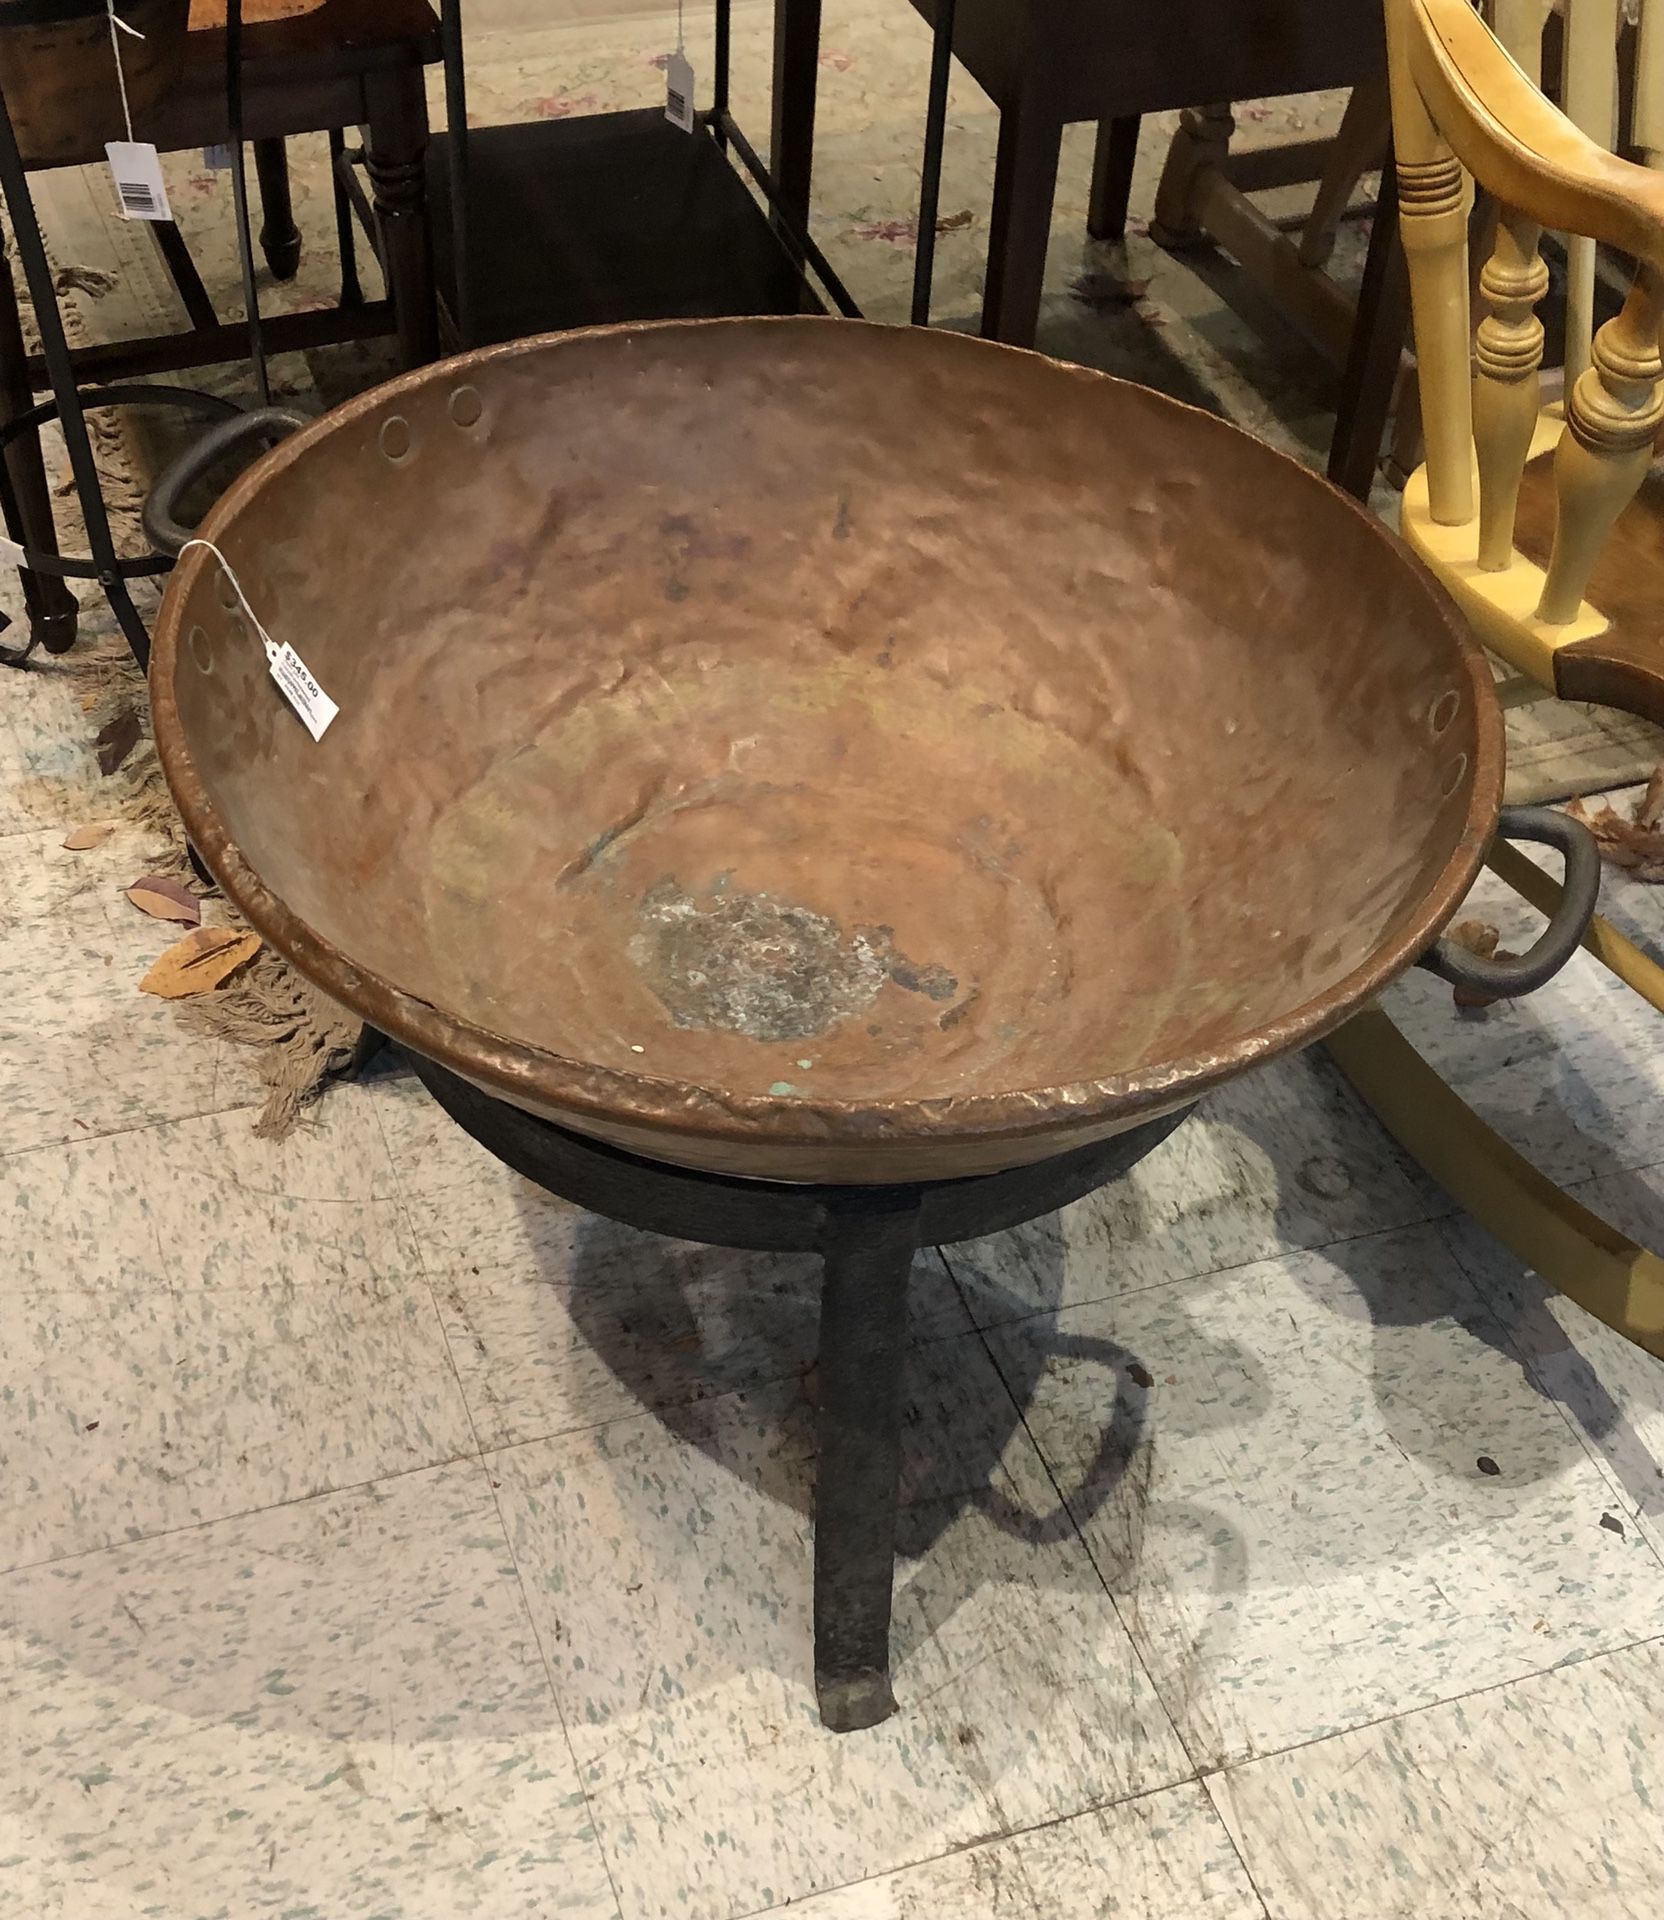 Antique hammered copper jam pot and stand